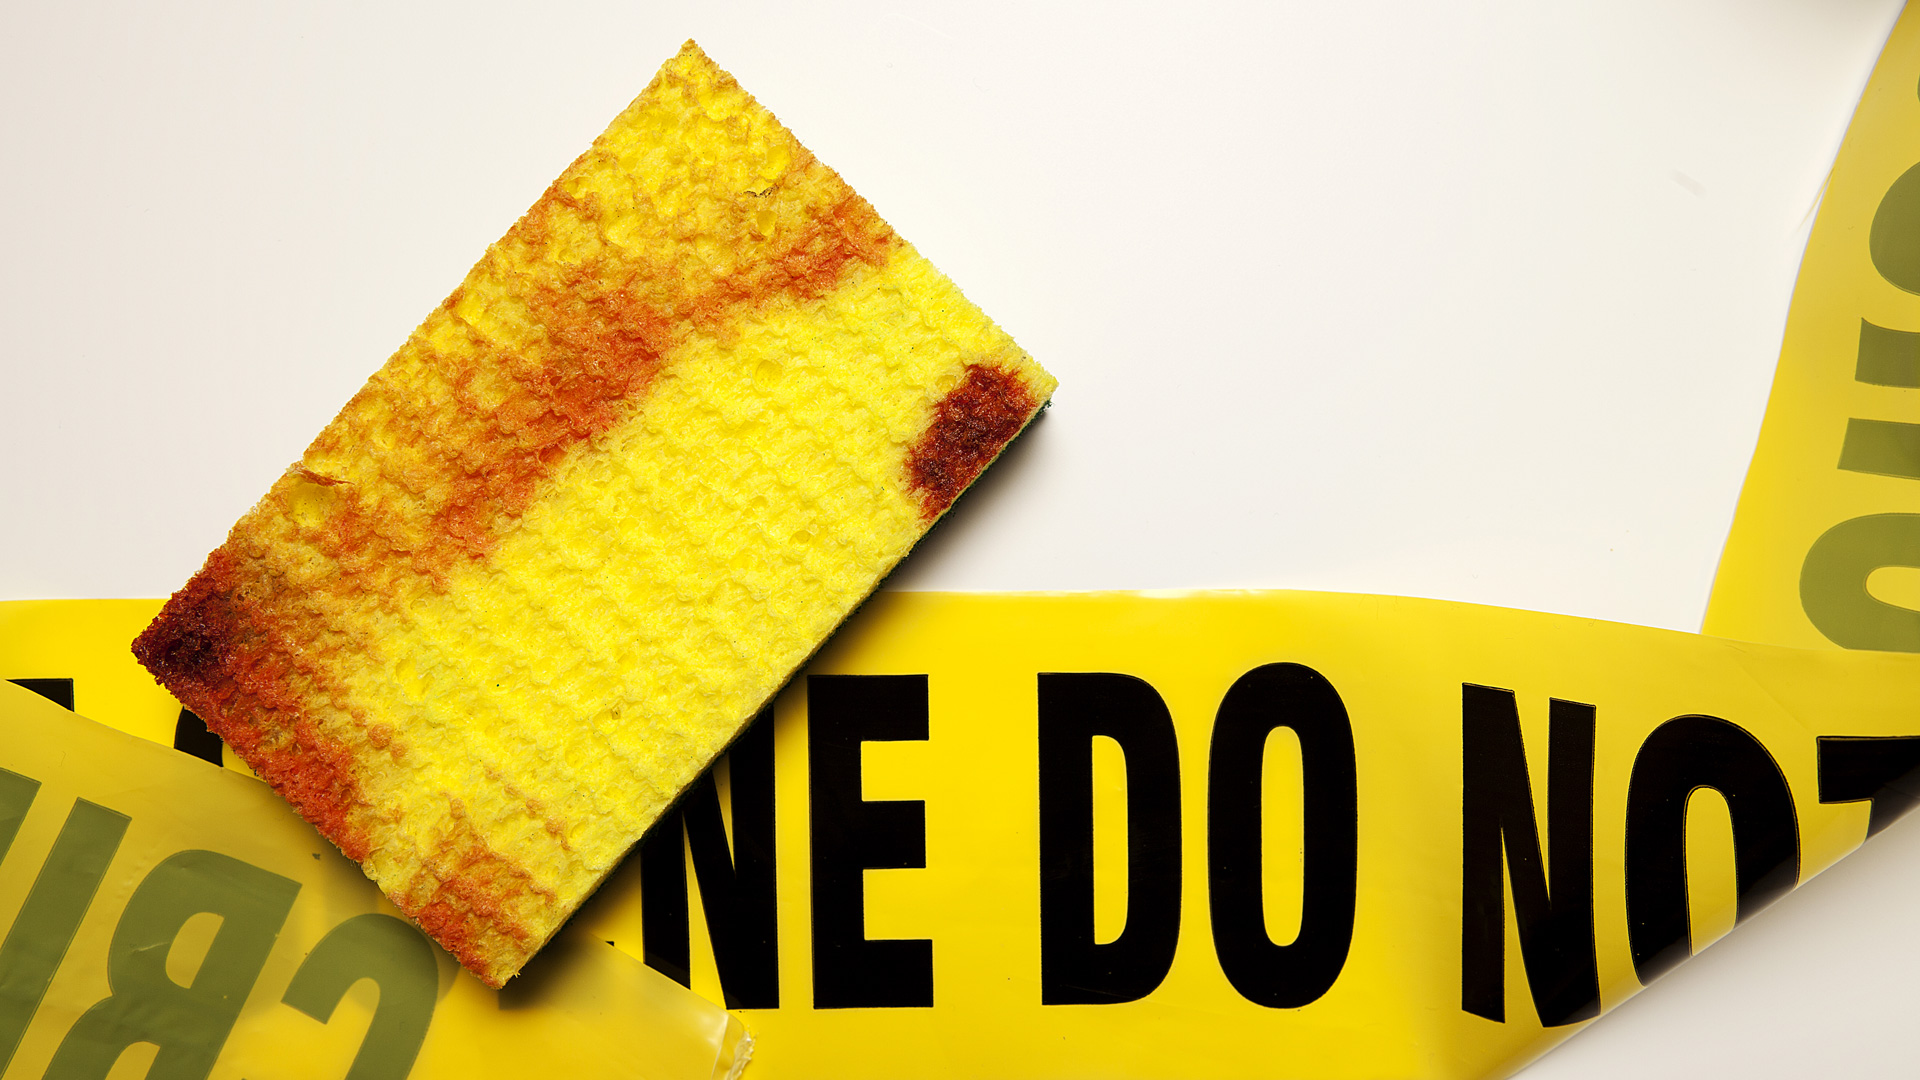 Could You Stomach the Job of a Crime Scene Cleaner?